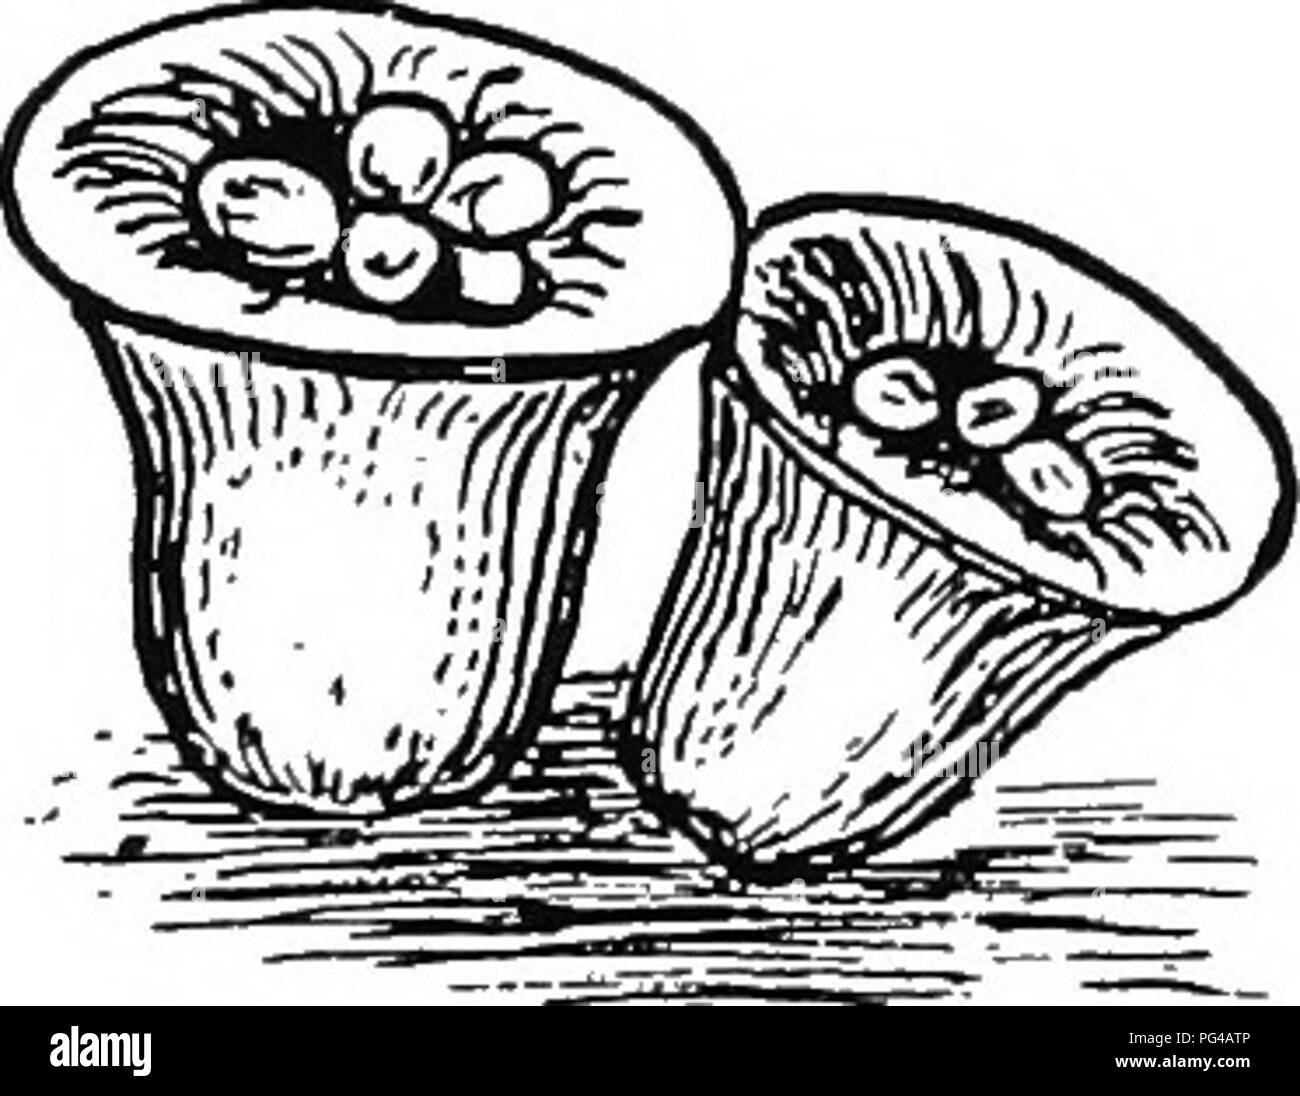 . Botany for agricultural students . Botany. 392 THALLOPHYTES. Fig. 348. — A Bird's Nest Fungus, Nidularia. About natural size. organic matter in the ground. Tlie sporophore is at first globose, but the gleba soon breaks out of the peridium and is elevated to some distance above ground by an elongating stalk. The spore masses arc slimy and have the odor of carrion. Certain insects which dissemi- nate the spores are attracted by the odor. Smuts (Ustilaginales). — The Smuts are parasitic Basidiomycetes. In some Smuts, the mycelium, although evident only in local areas, traverses widely through t Stock Photo